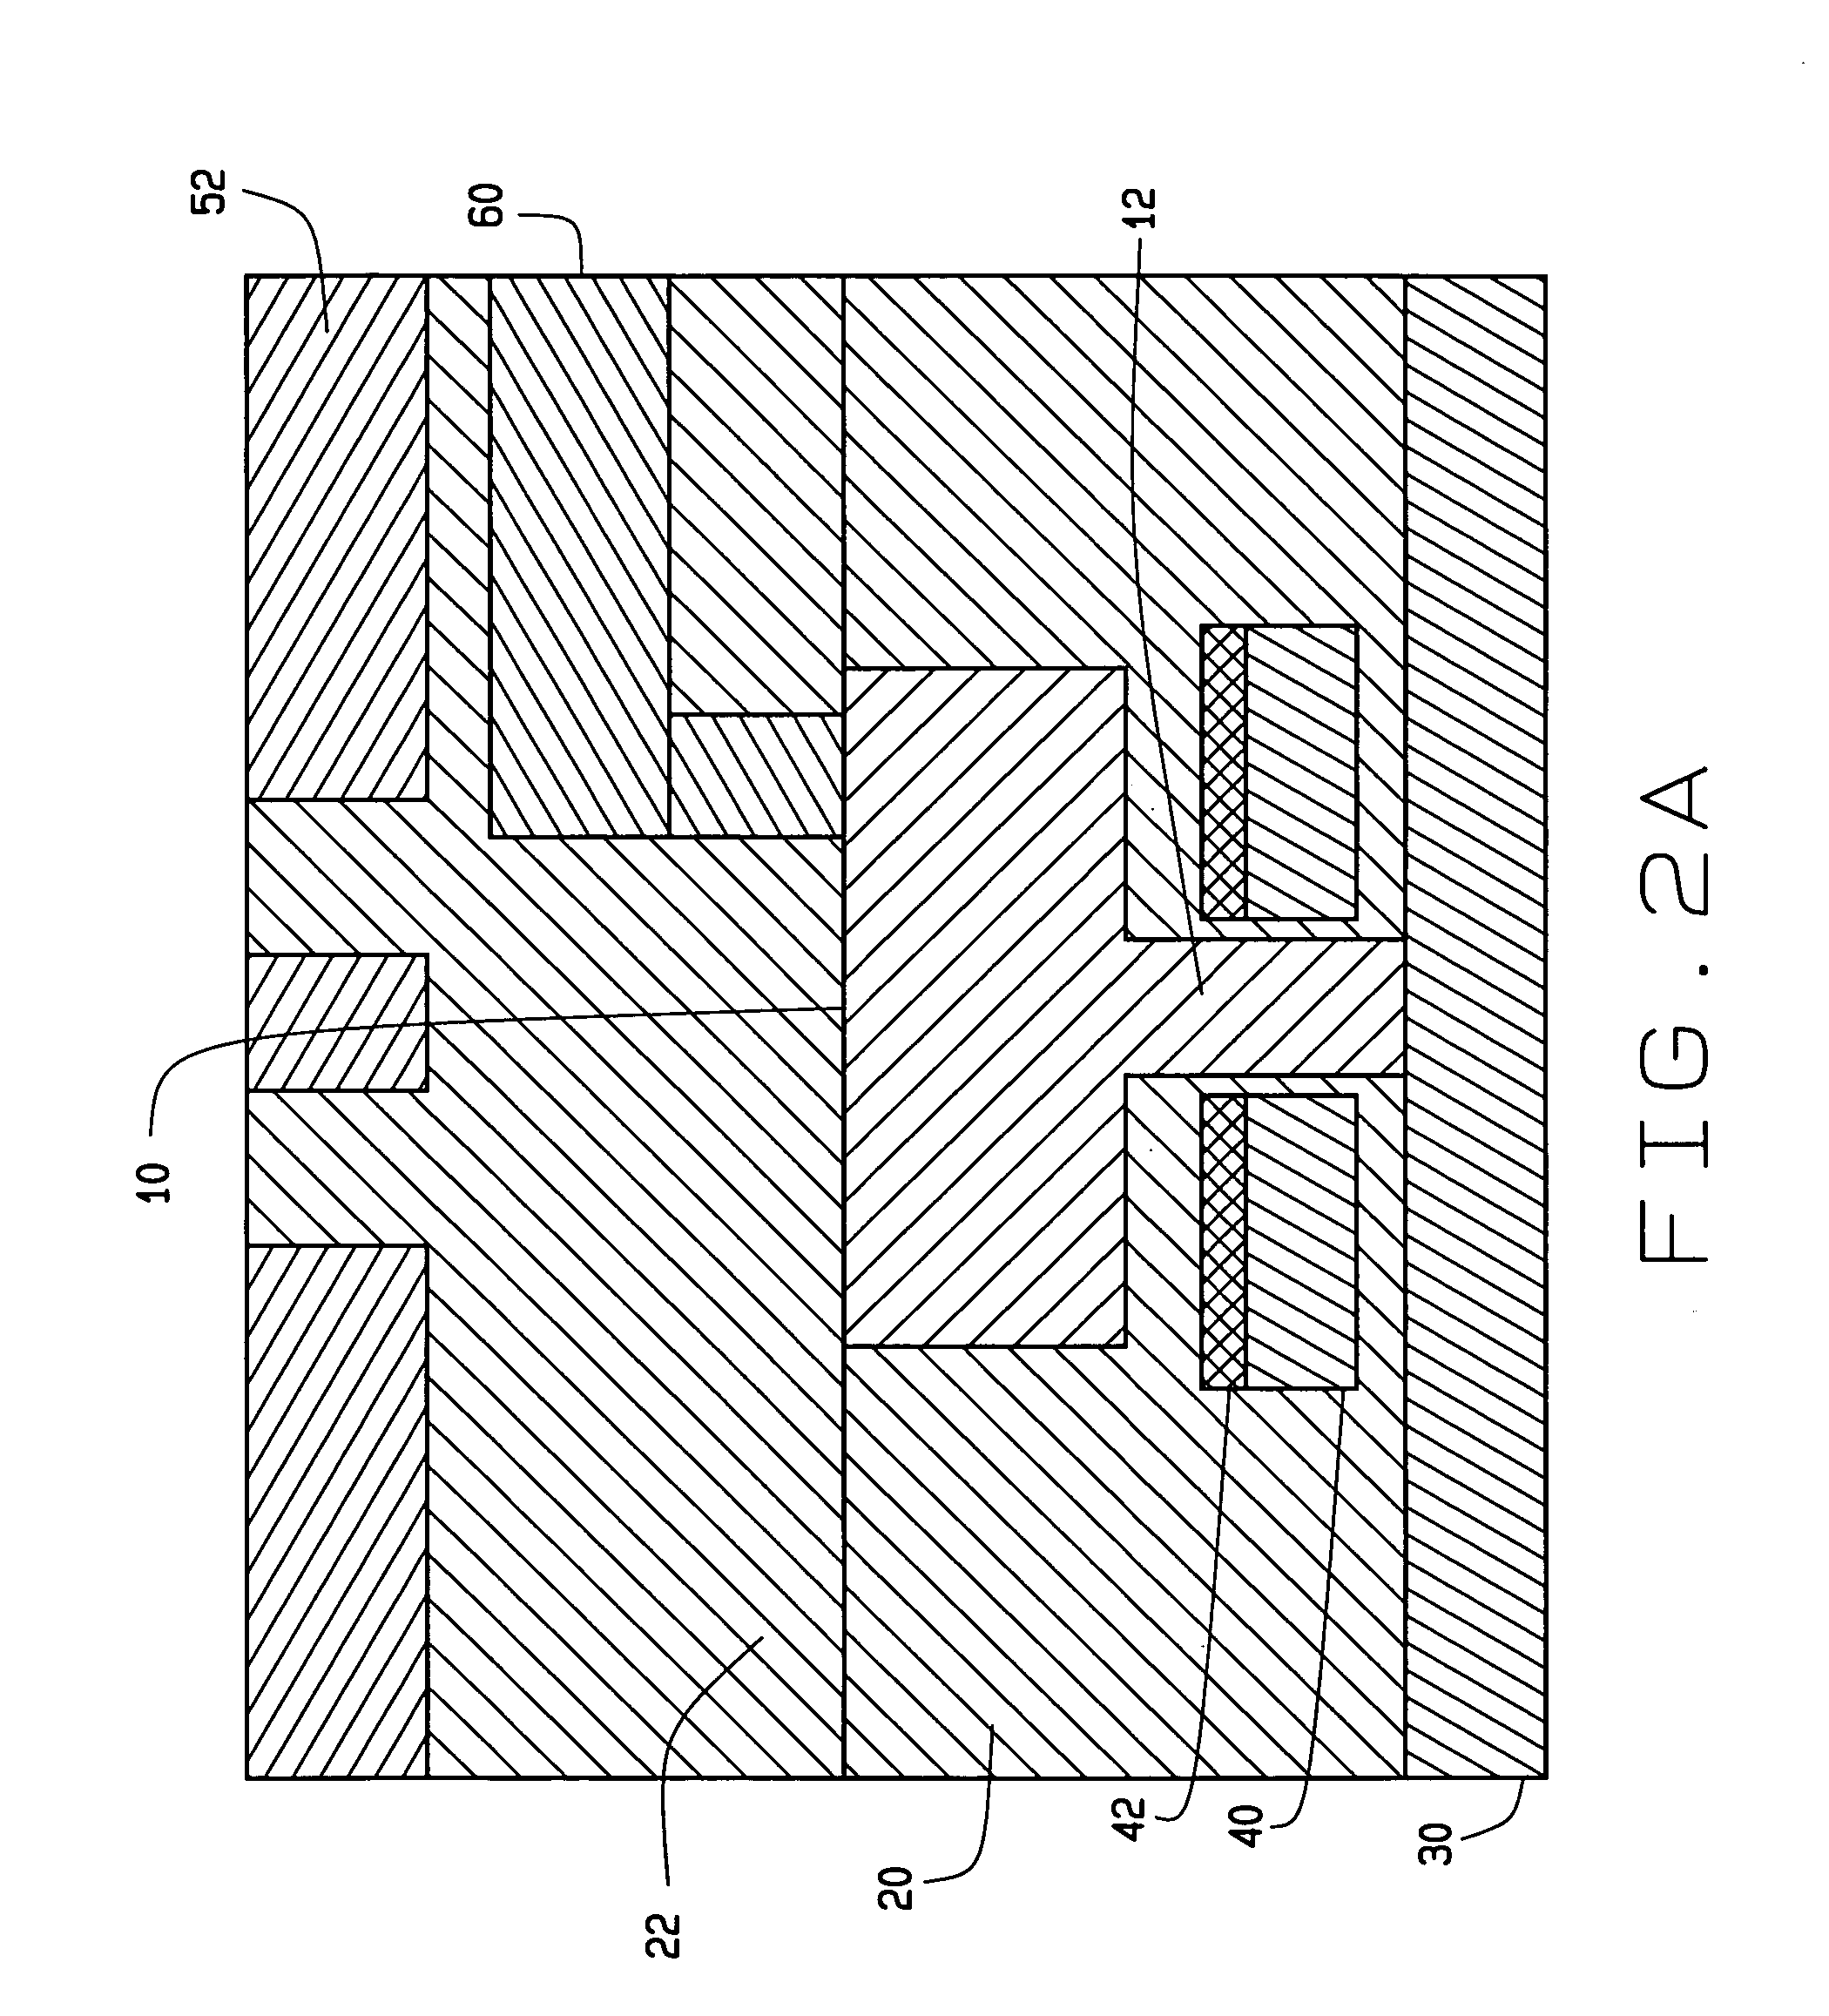 Semiconductor photonic devices with enhanced responsivity and reduced stray light